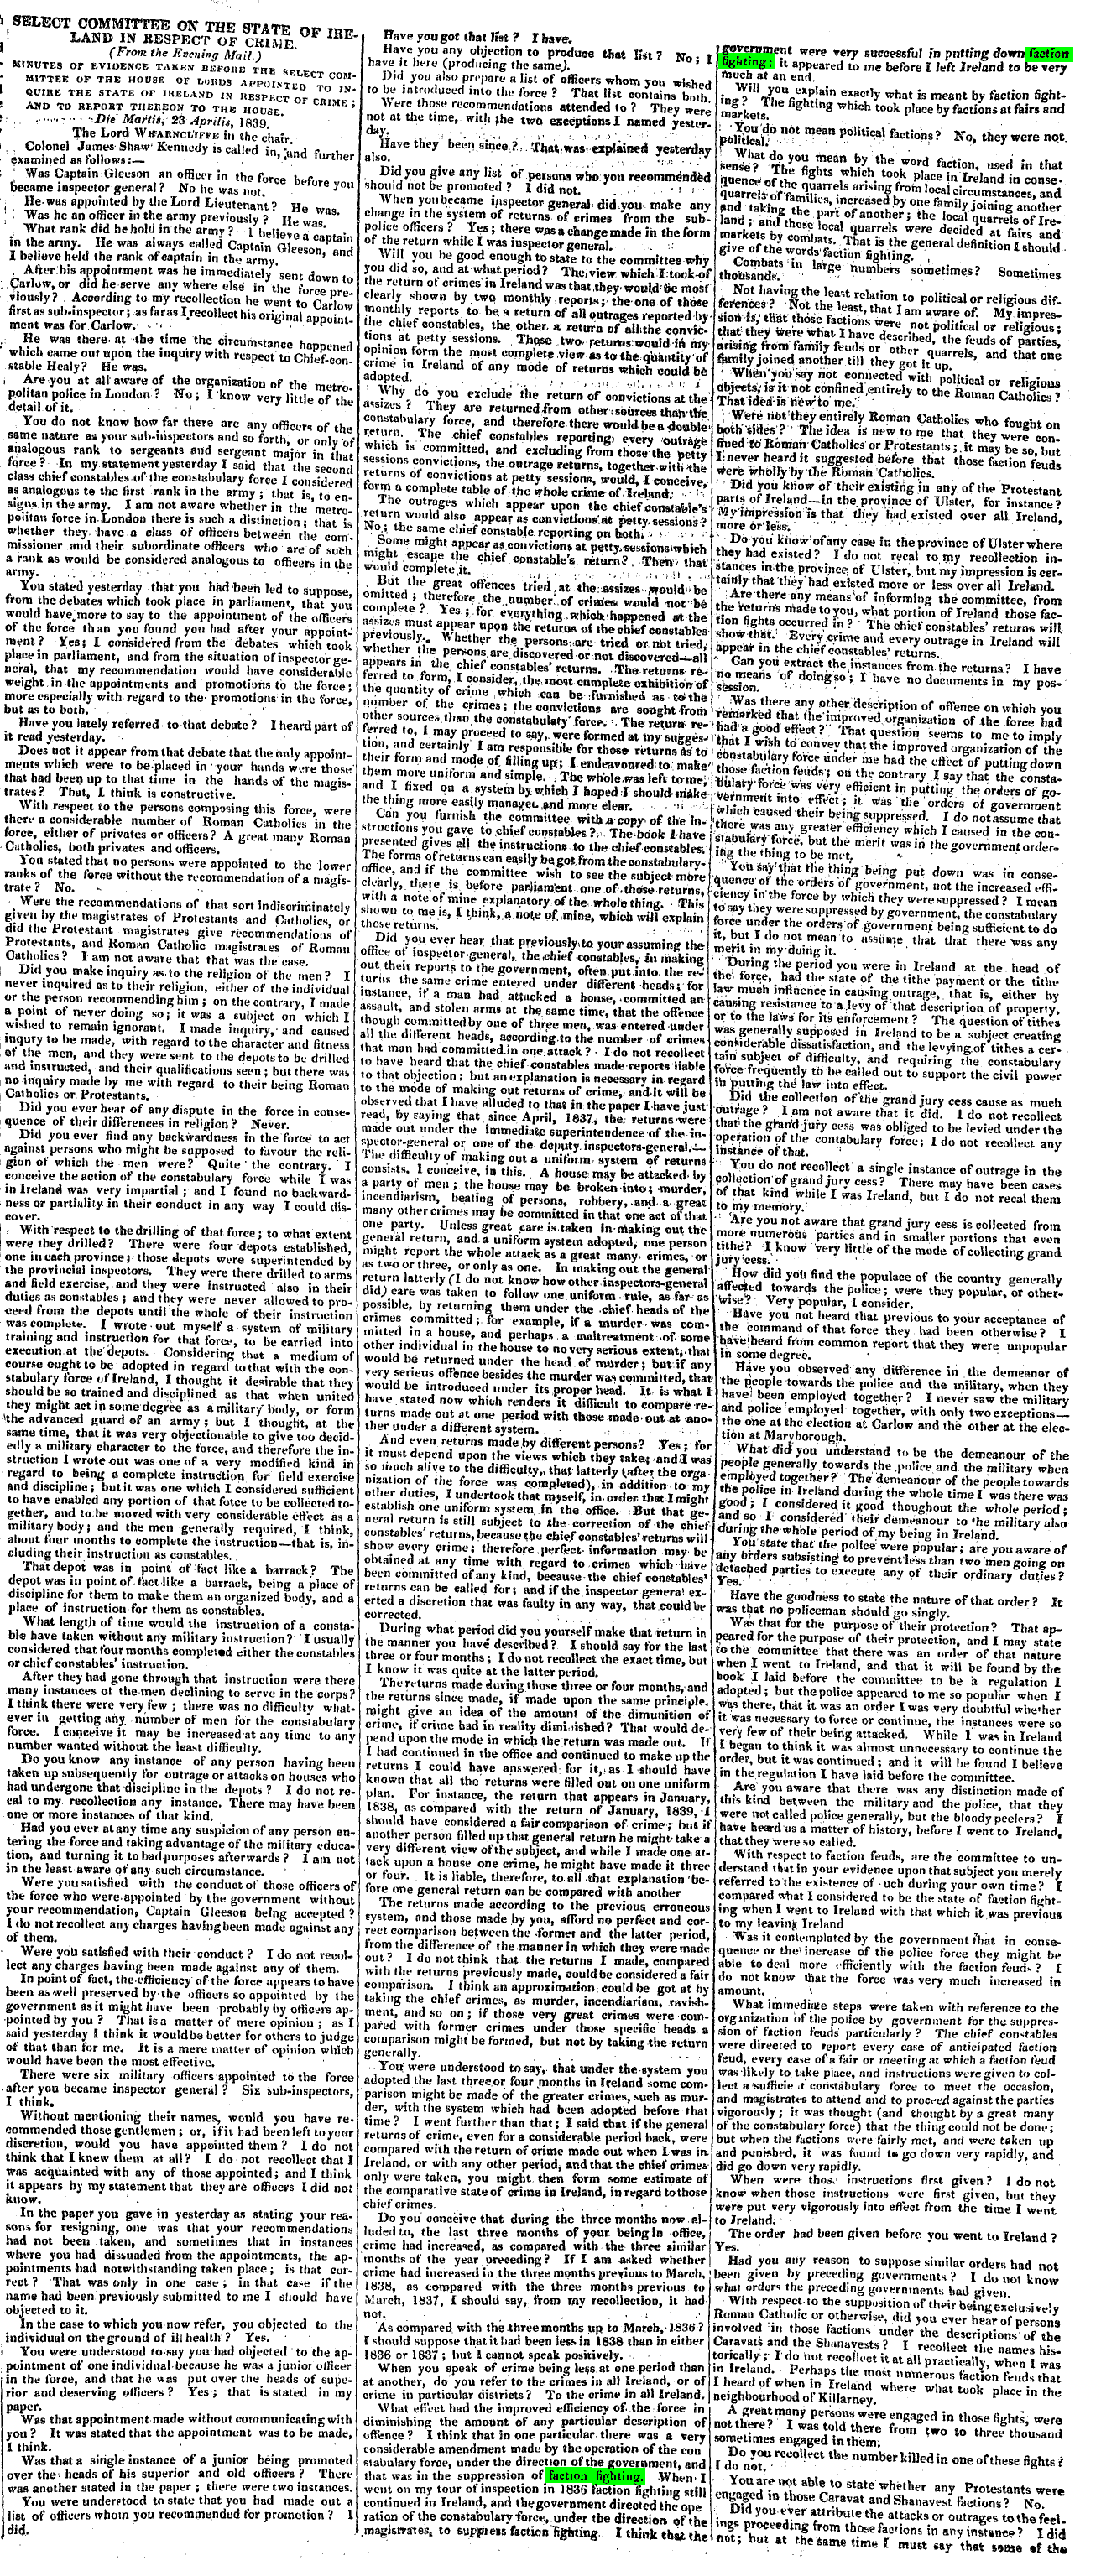 Faction fighting Select Committee report 1839.png